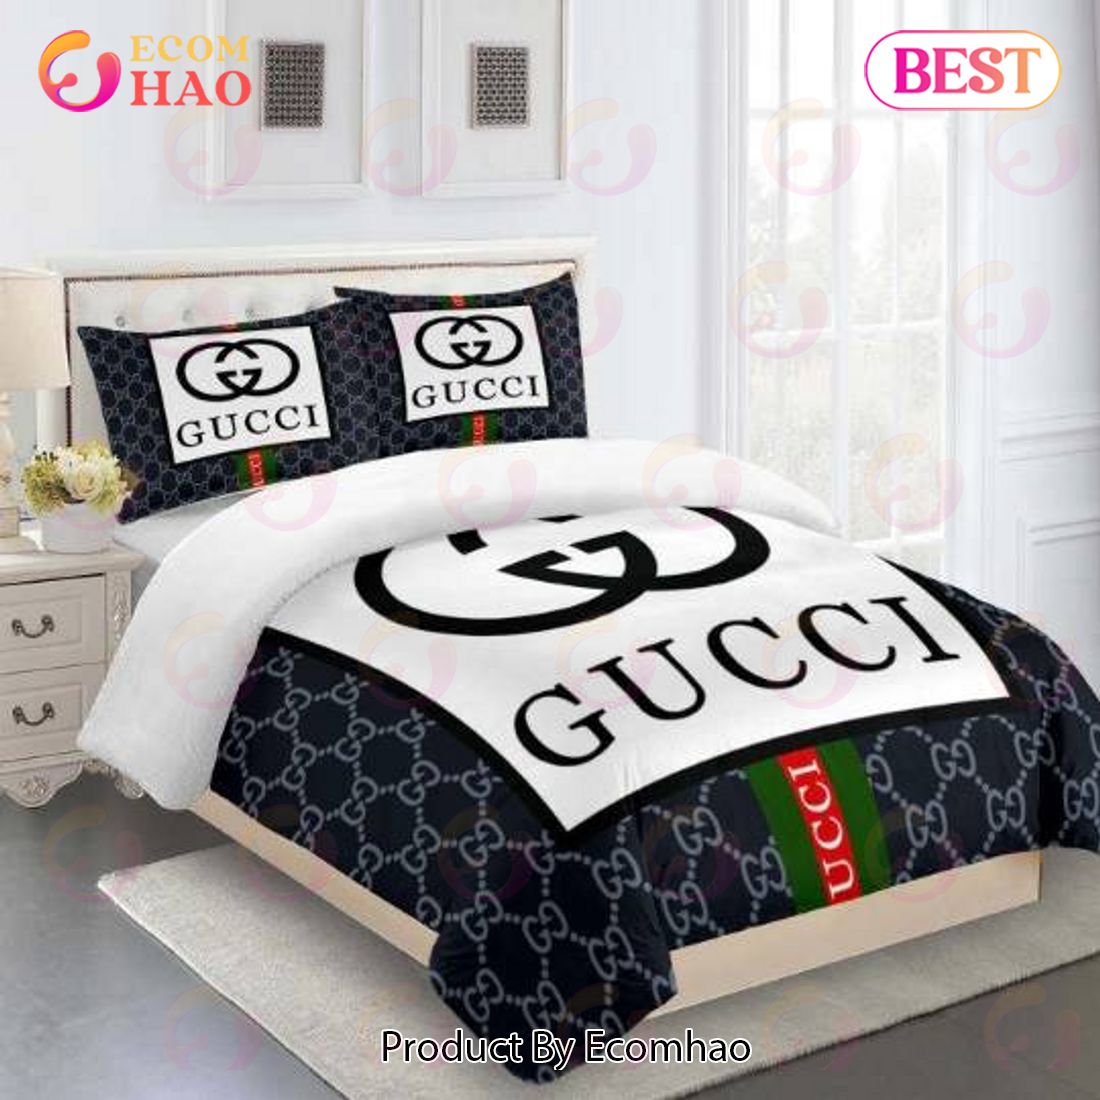 Gucci Bedding Set Blue And White Luxury Bed Sheets - Ecomhao Store